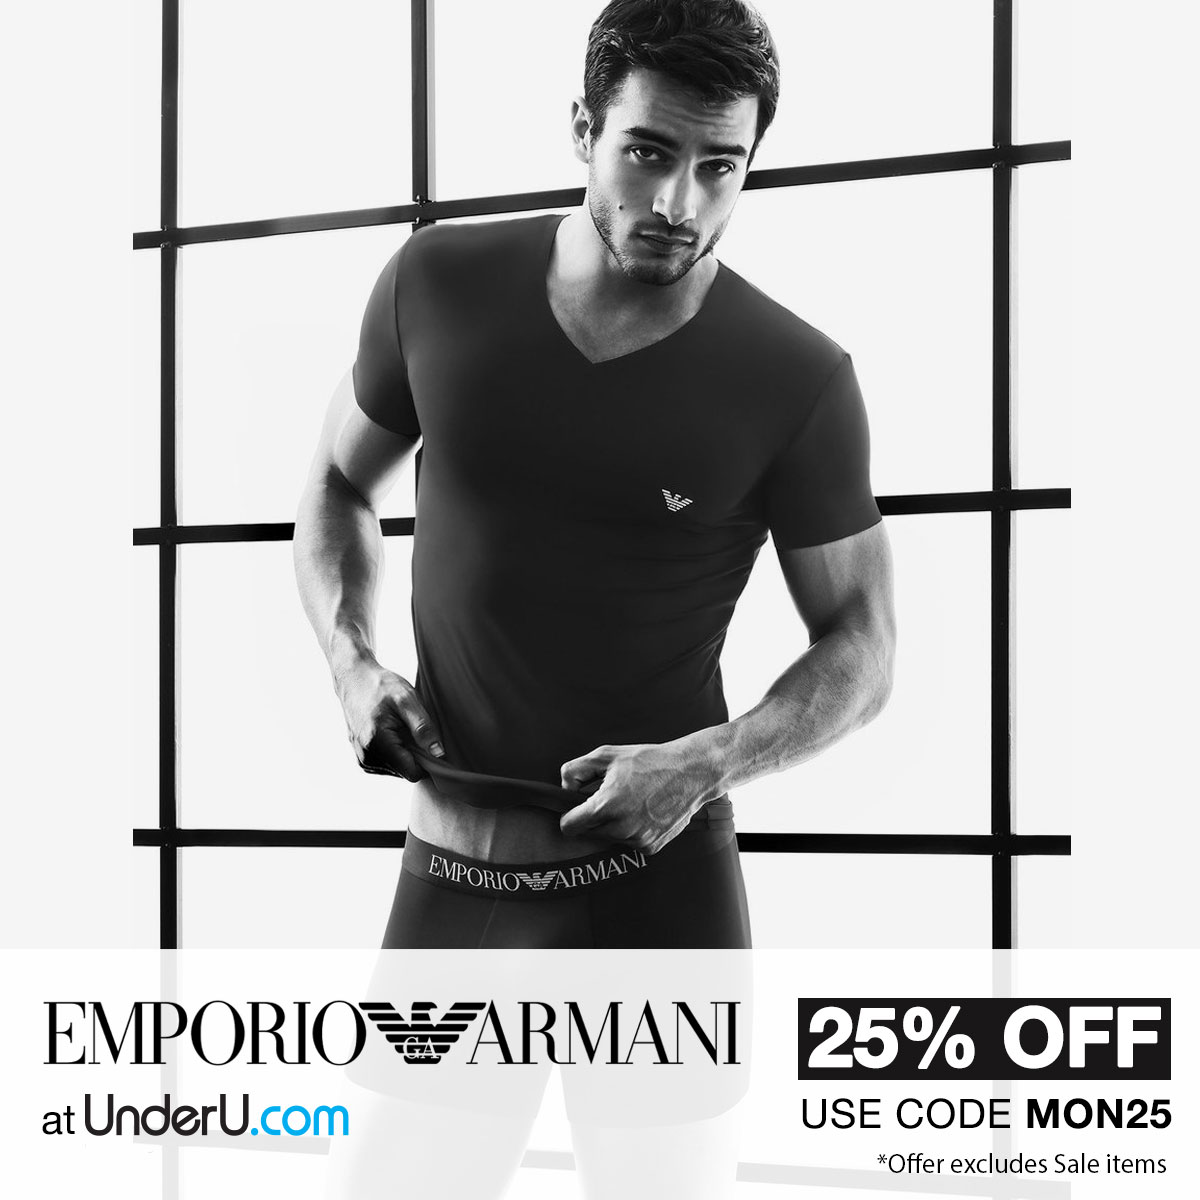 25% off all EMPORIO ARMANI orders this week. MON25 code.